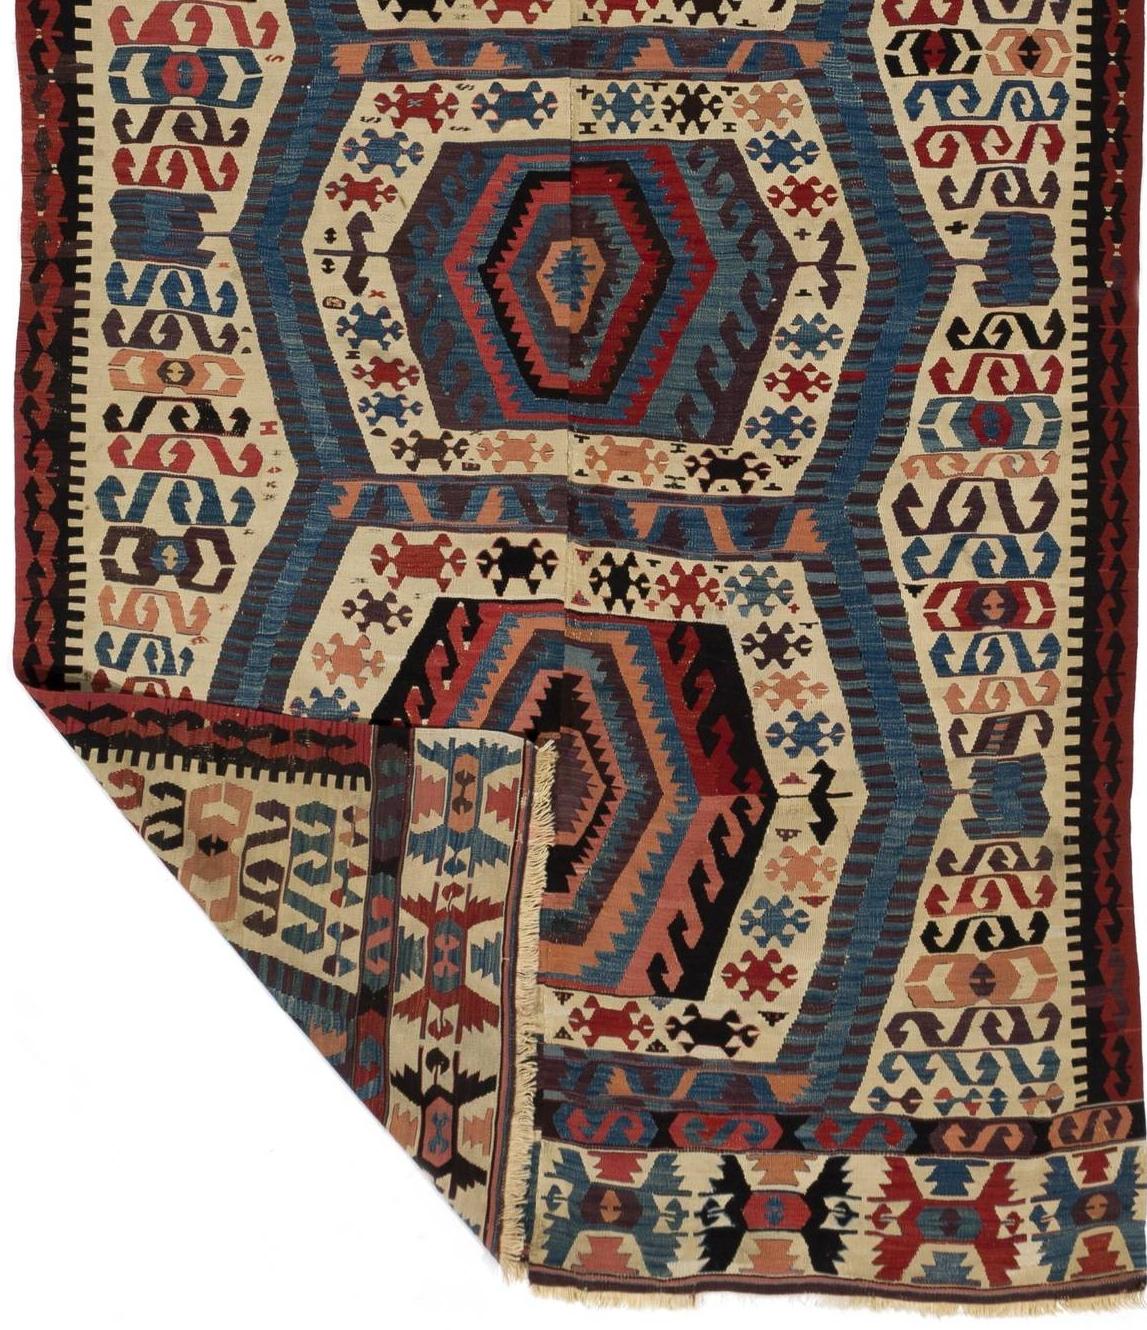 5' x 12'3'' Antique Ottoman Kilim from Aydın, Ca 1800 In Good Condition For Sale In Philadelphia, PA